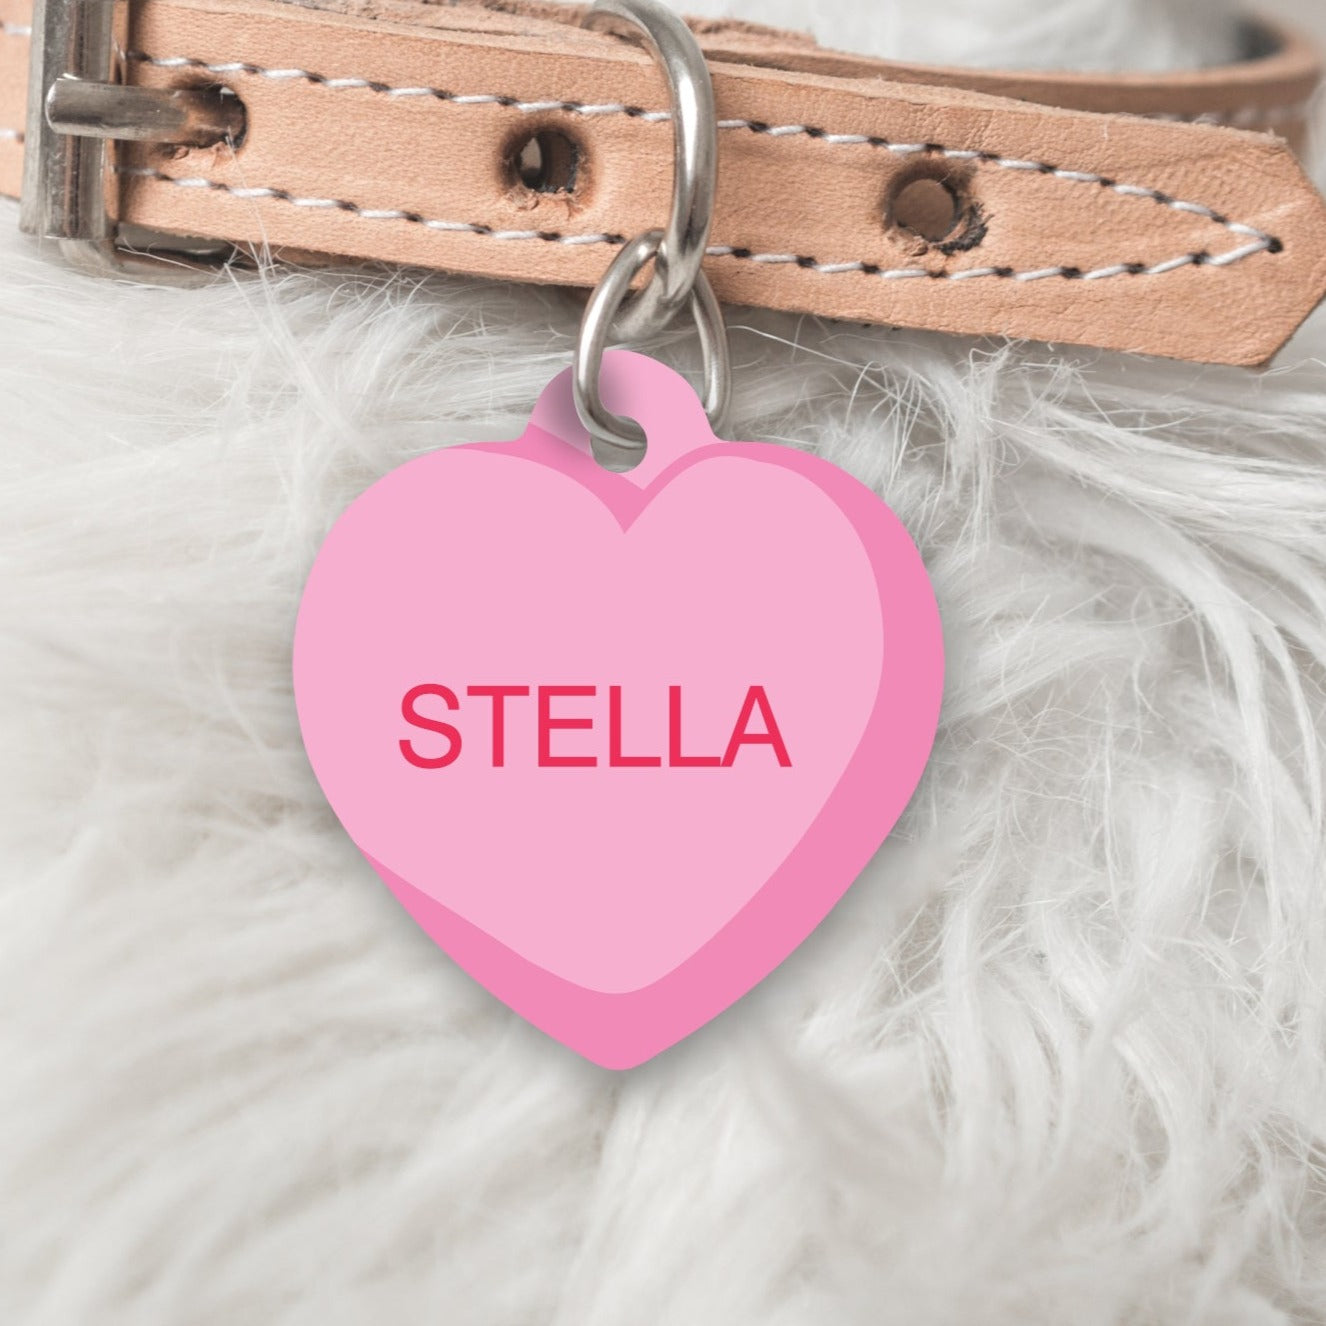 CANDY HEART Solid Personalised Dog or Cat ID Tag - PINK